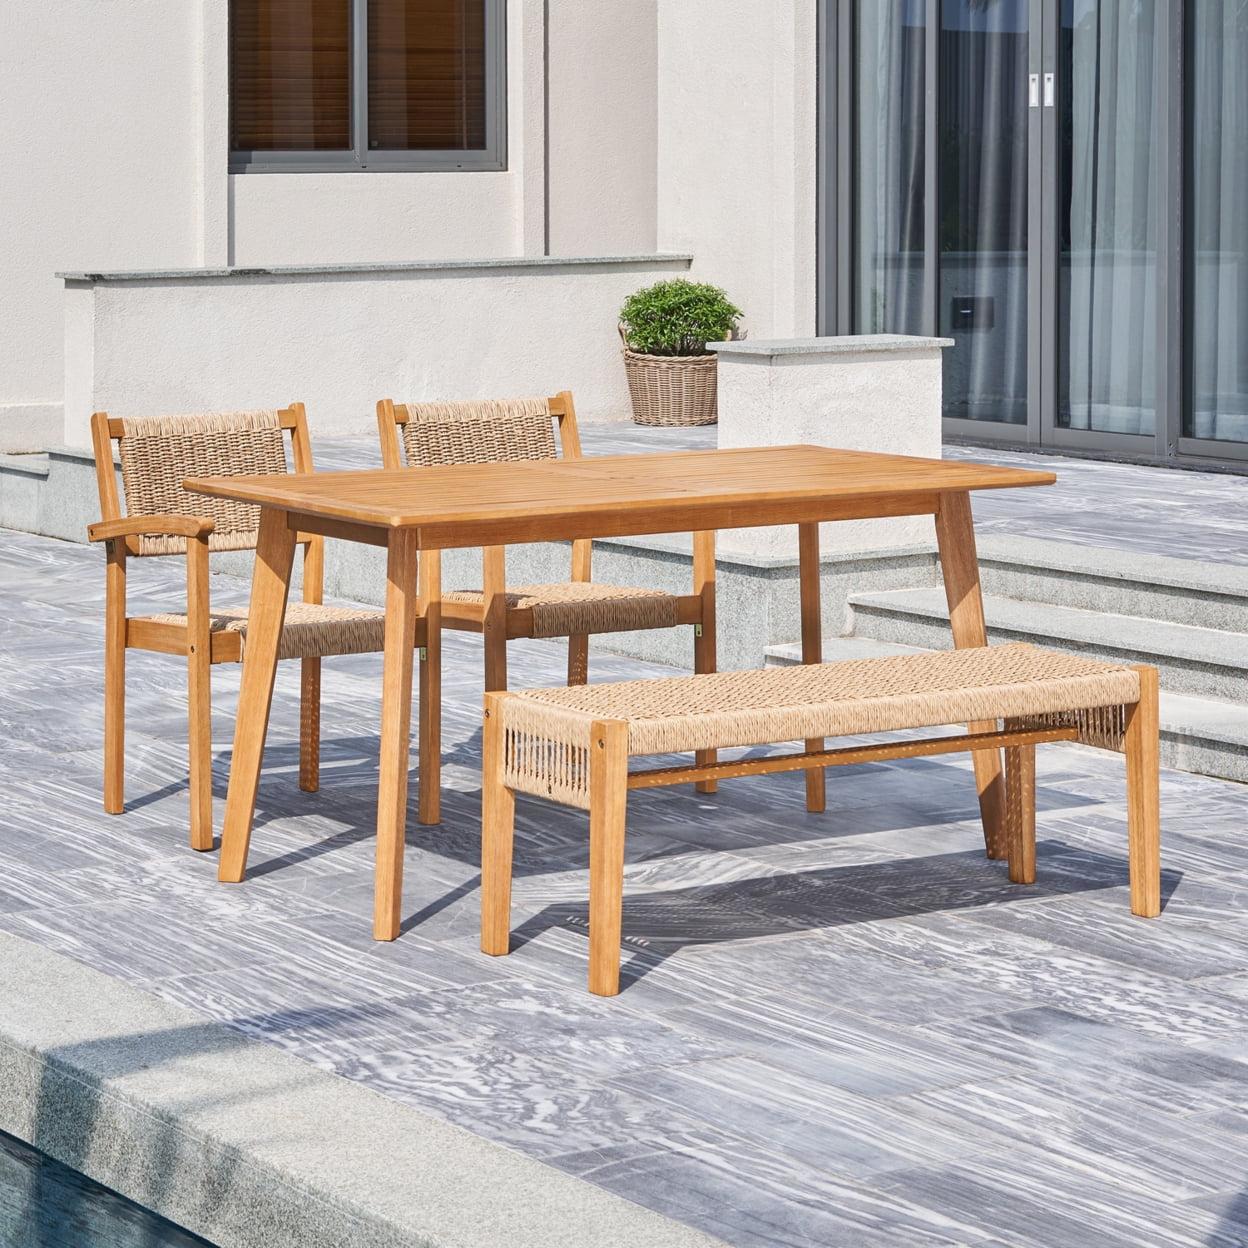 Chesapeake 5-Person Honey Acacia & Strapped Rattan Outdoor Dining Set